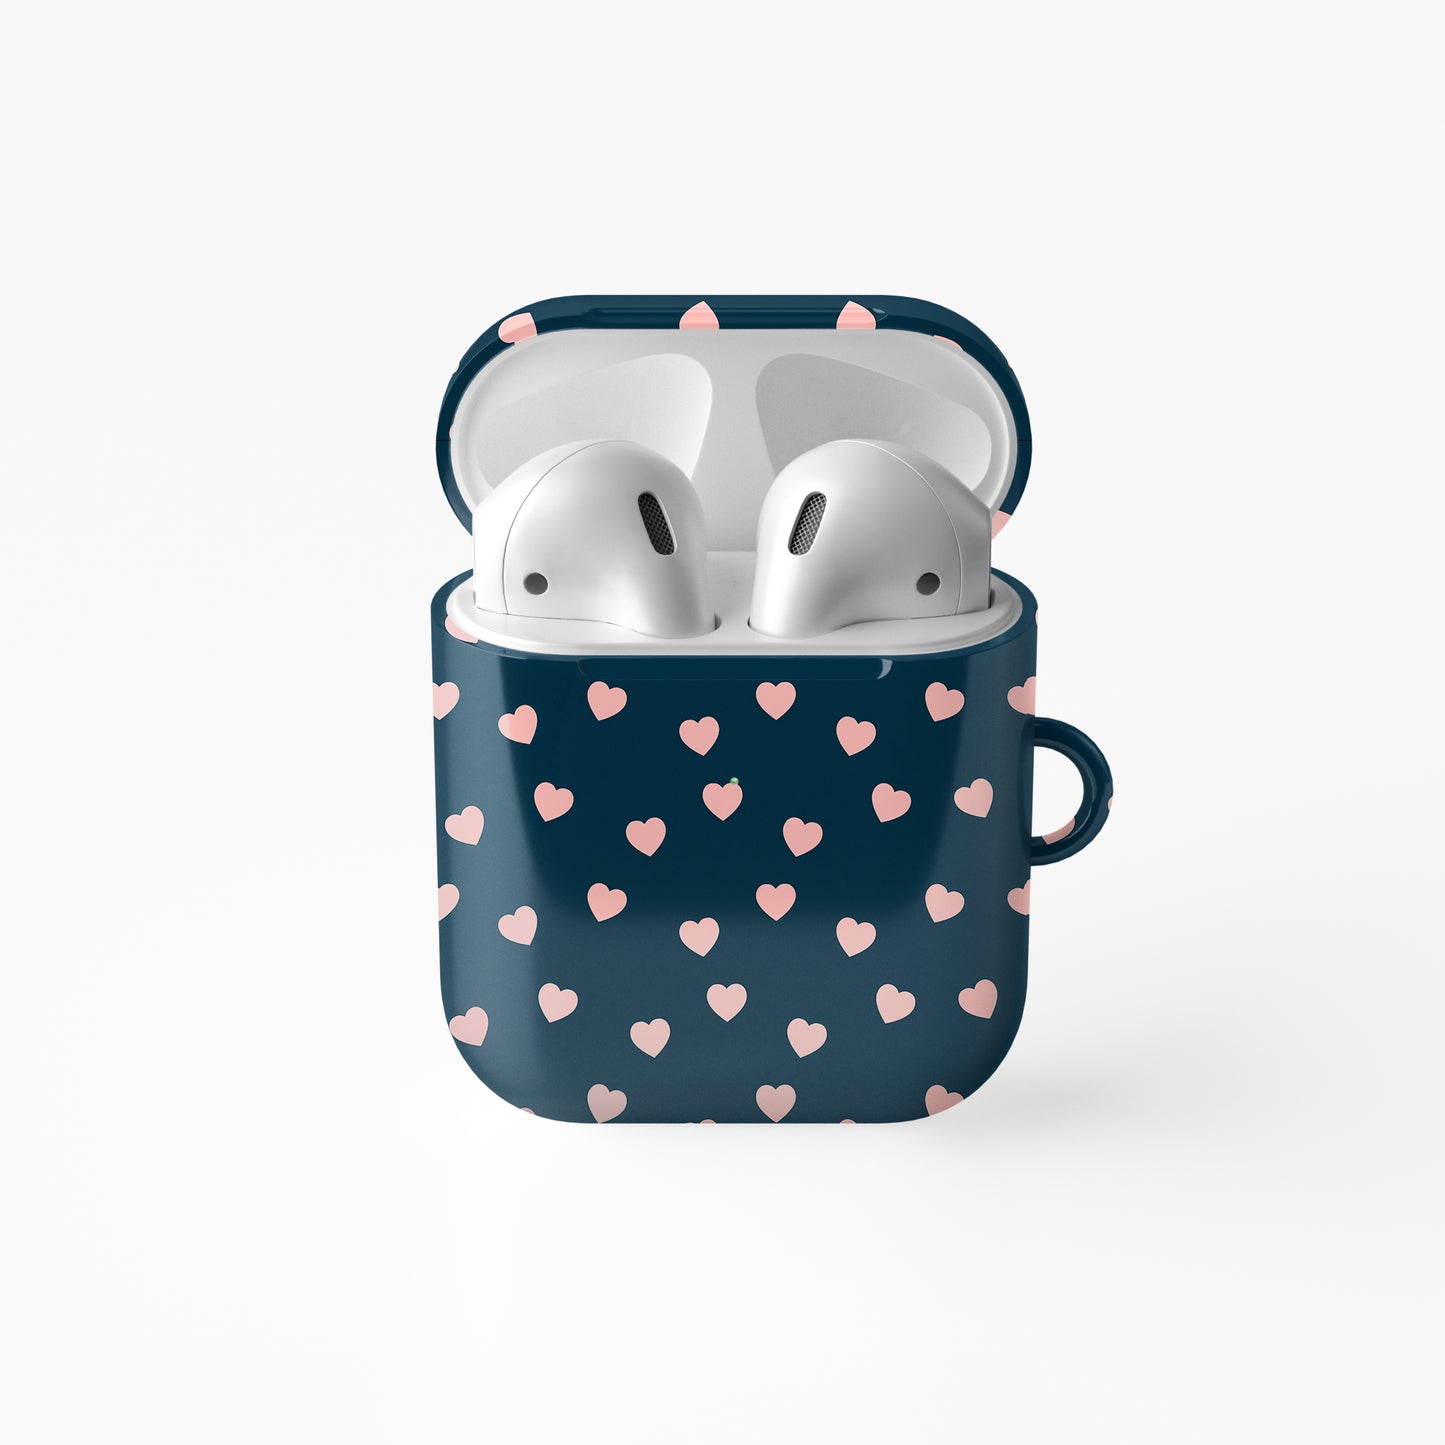 Navy Pink Hearts - AirPods Case